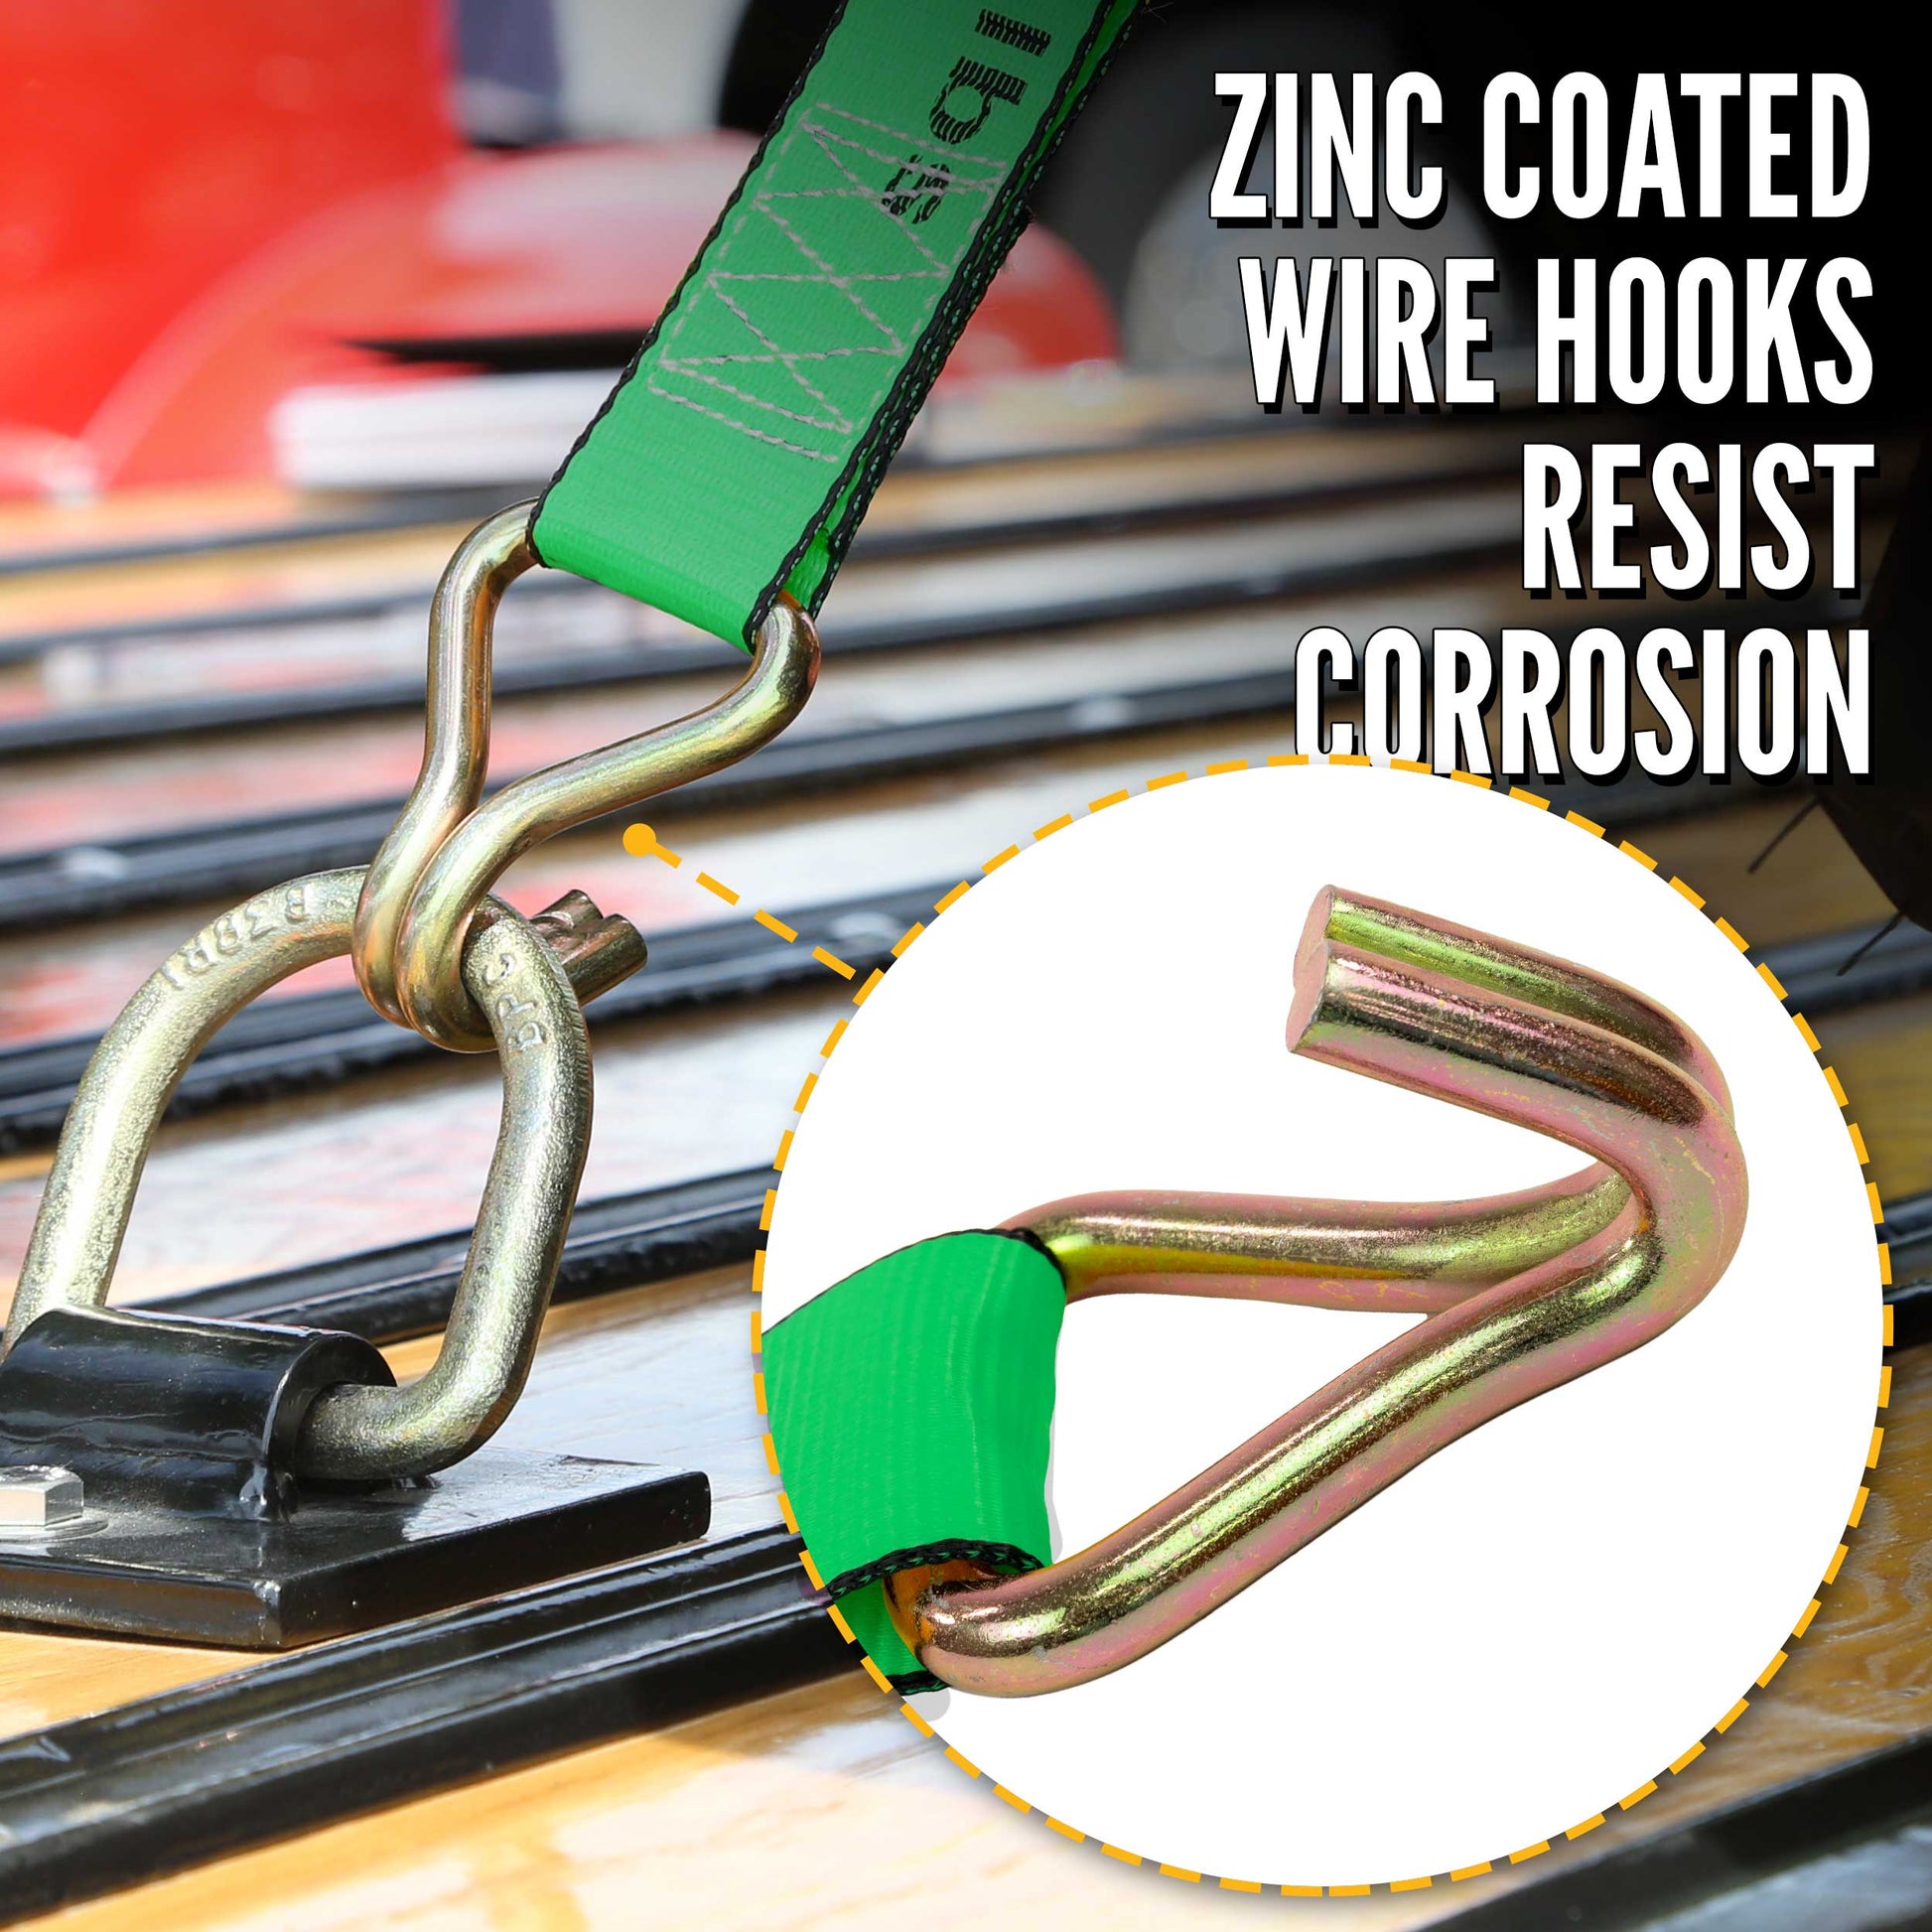 3-x-40-winch-strap-with-wire-hook-image-3